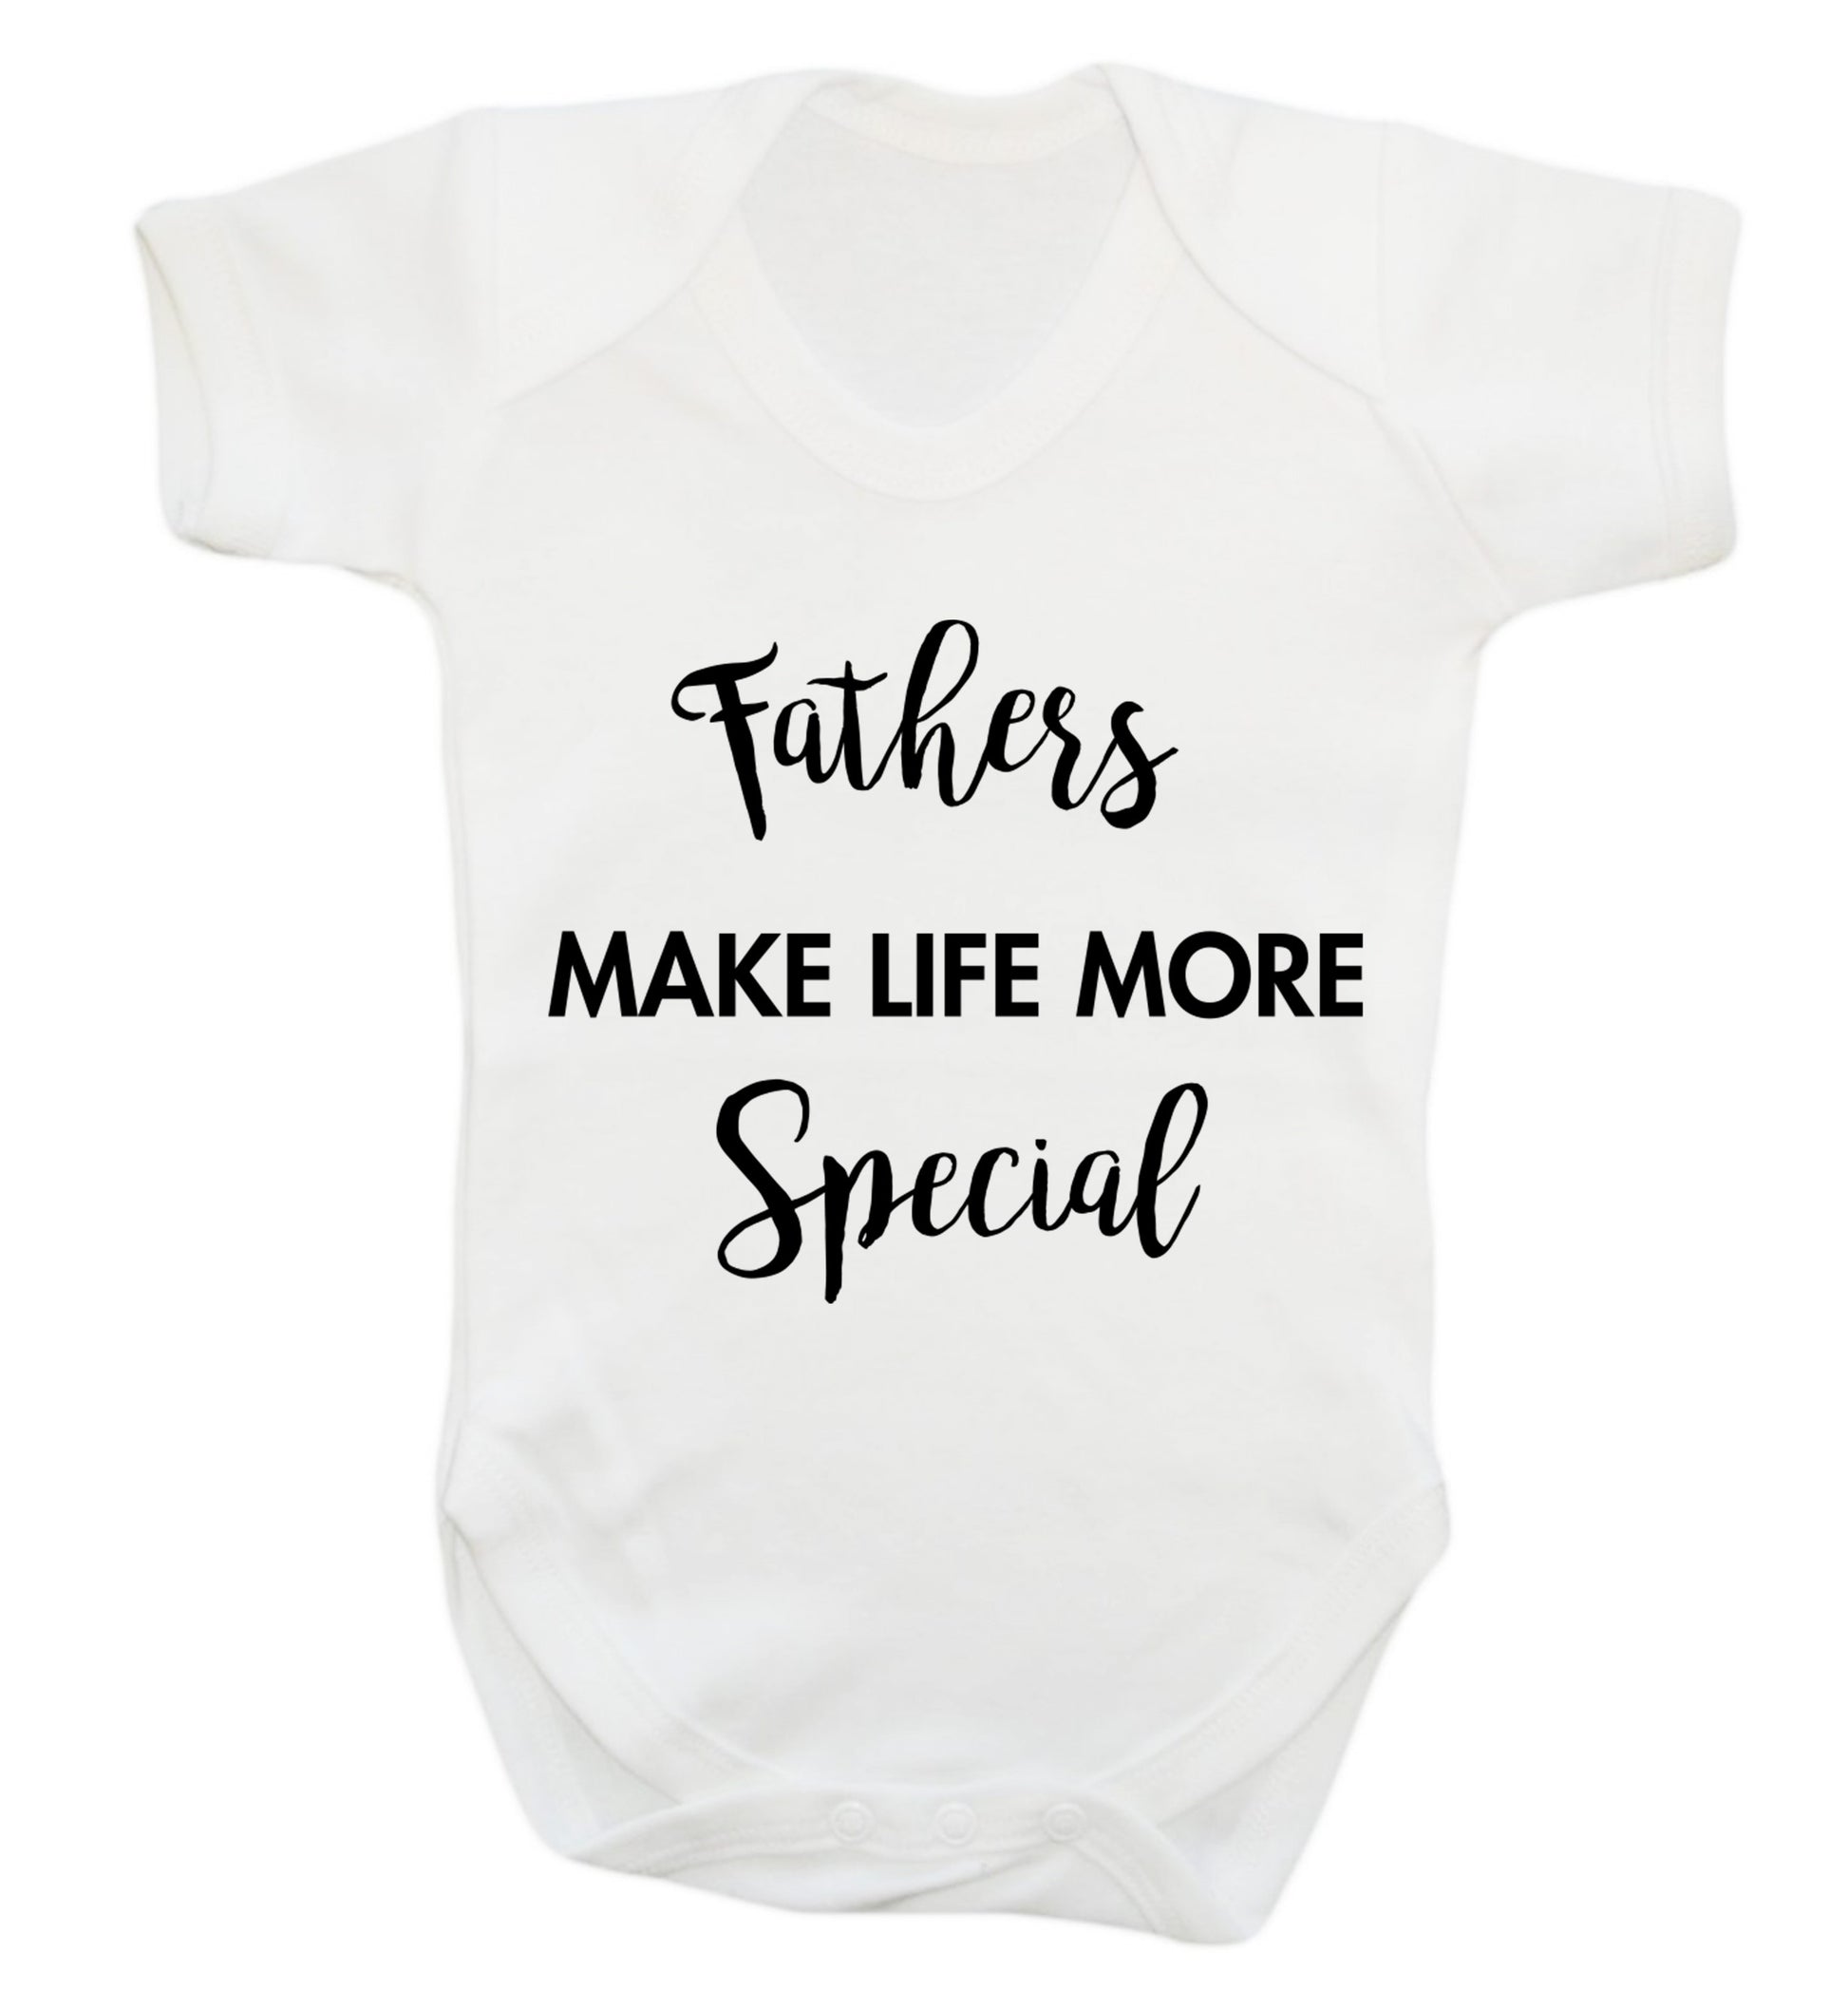 Fathers make life more special Baby Vest white 18-24 months